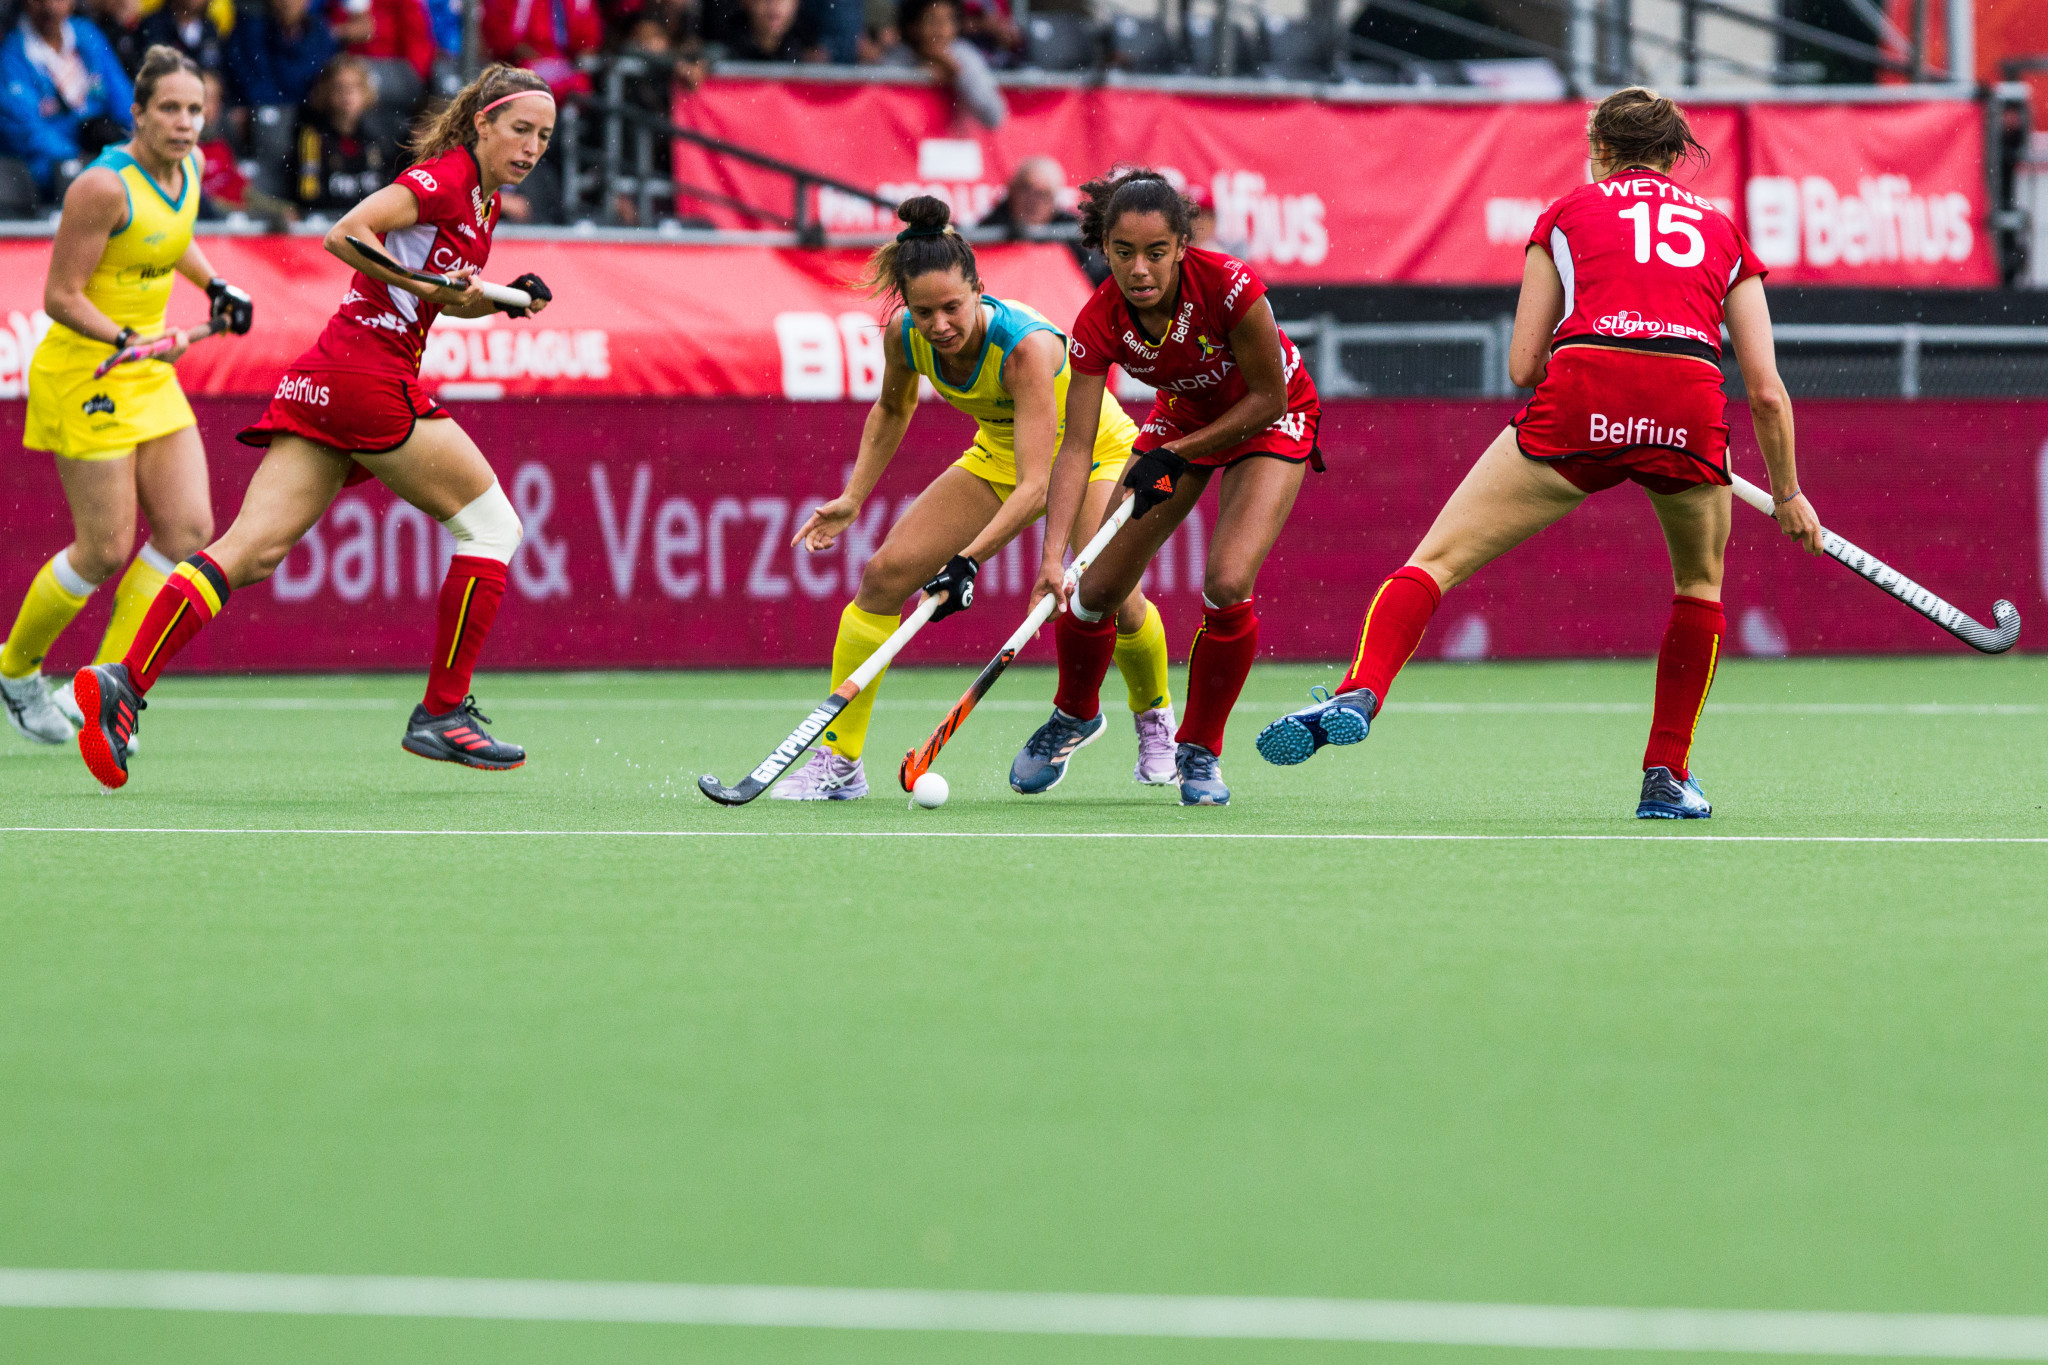 Belgium ended a five-match losing streak with victory over Australia in the women's competition ©Getty Images